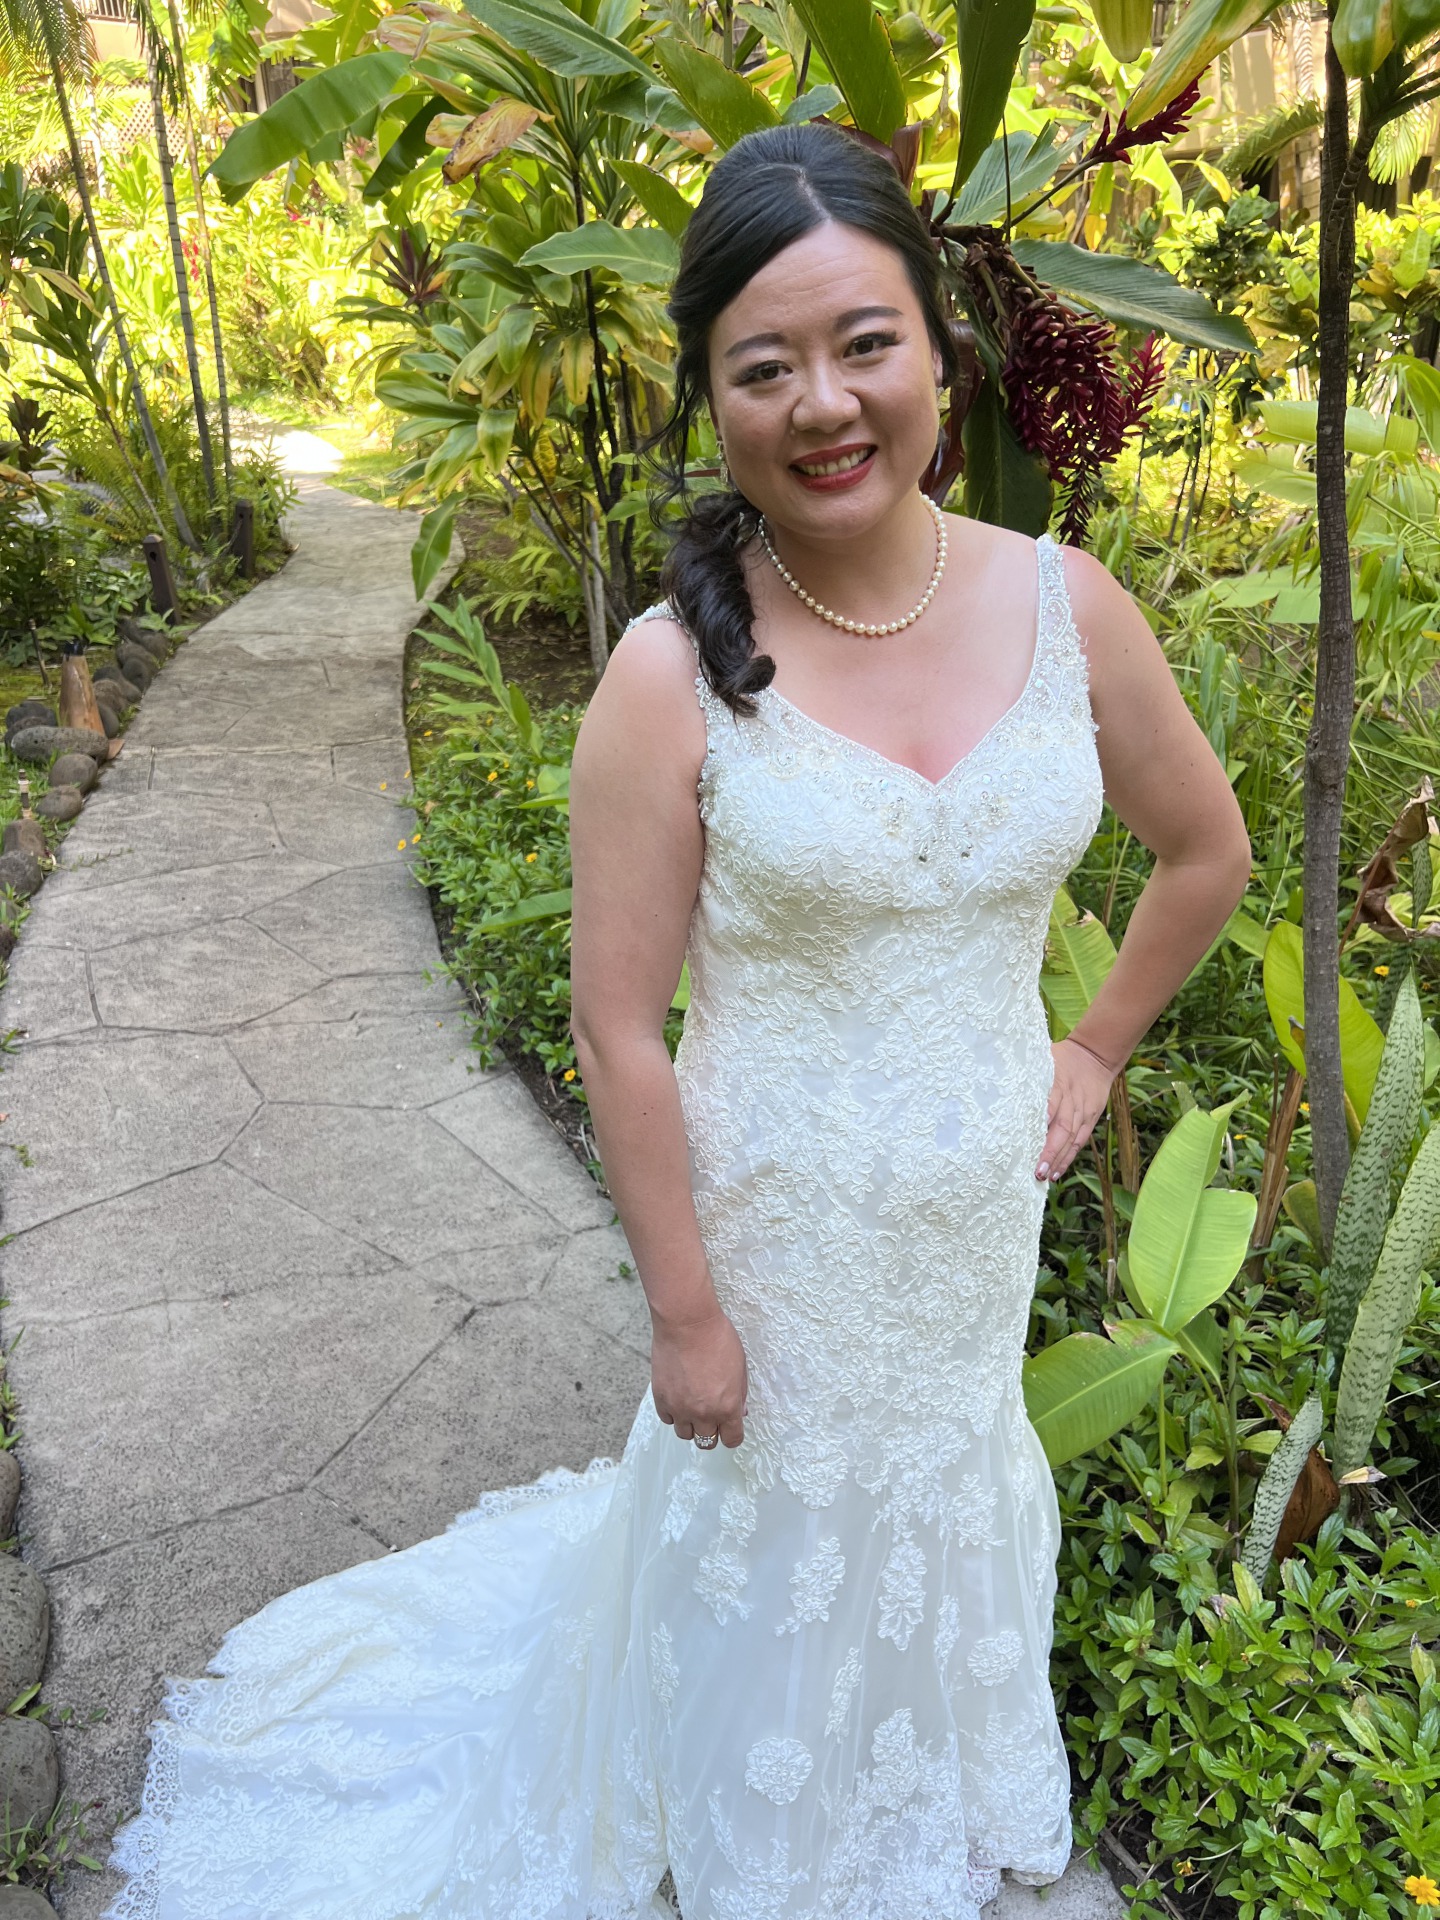 Ying before her wedding modeling off her altered gown that now fits perfectly